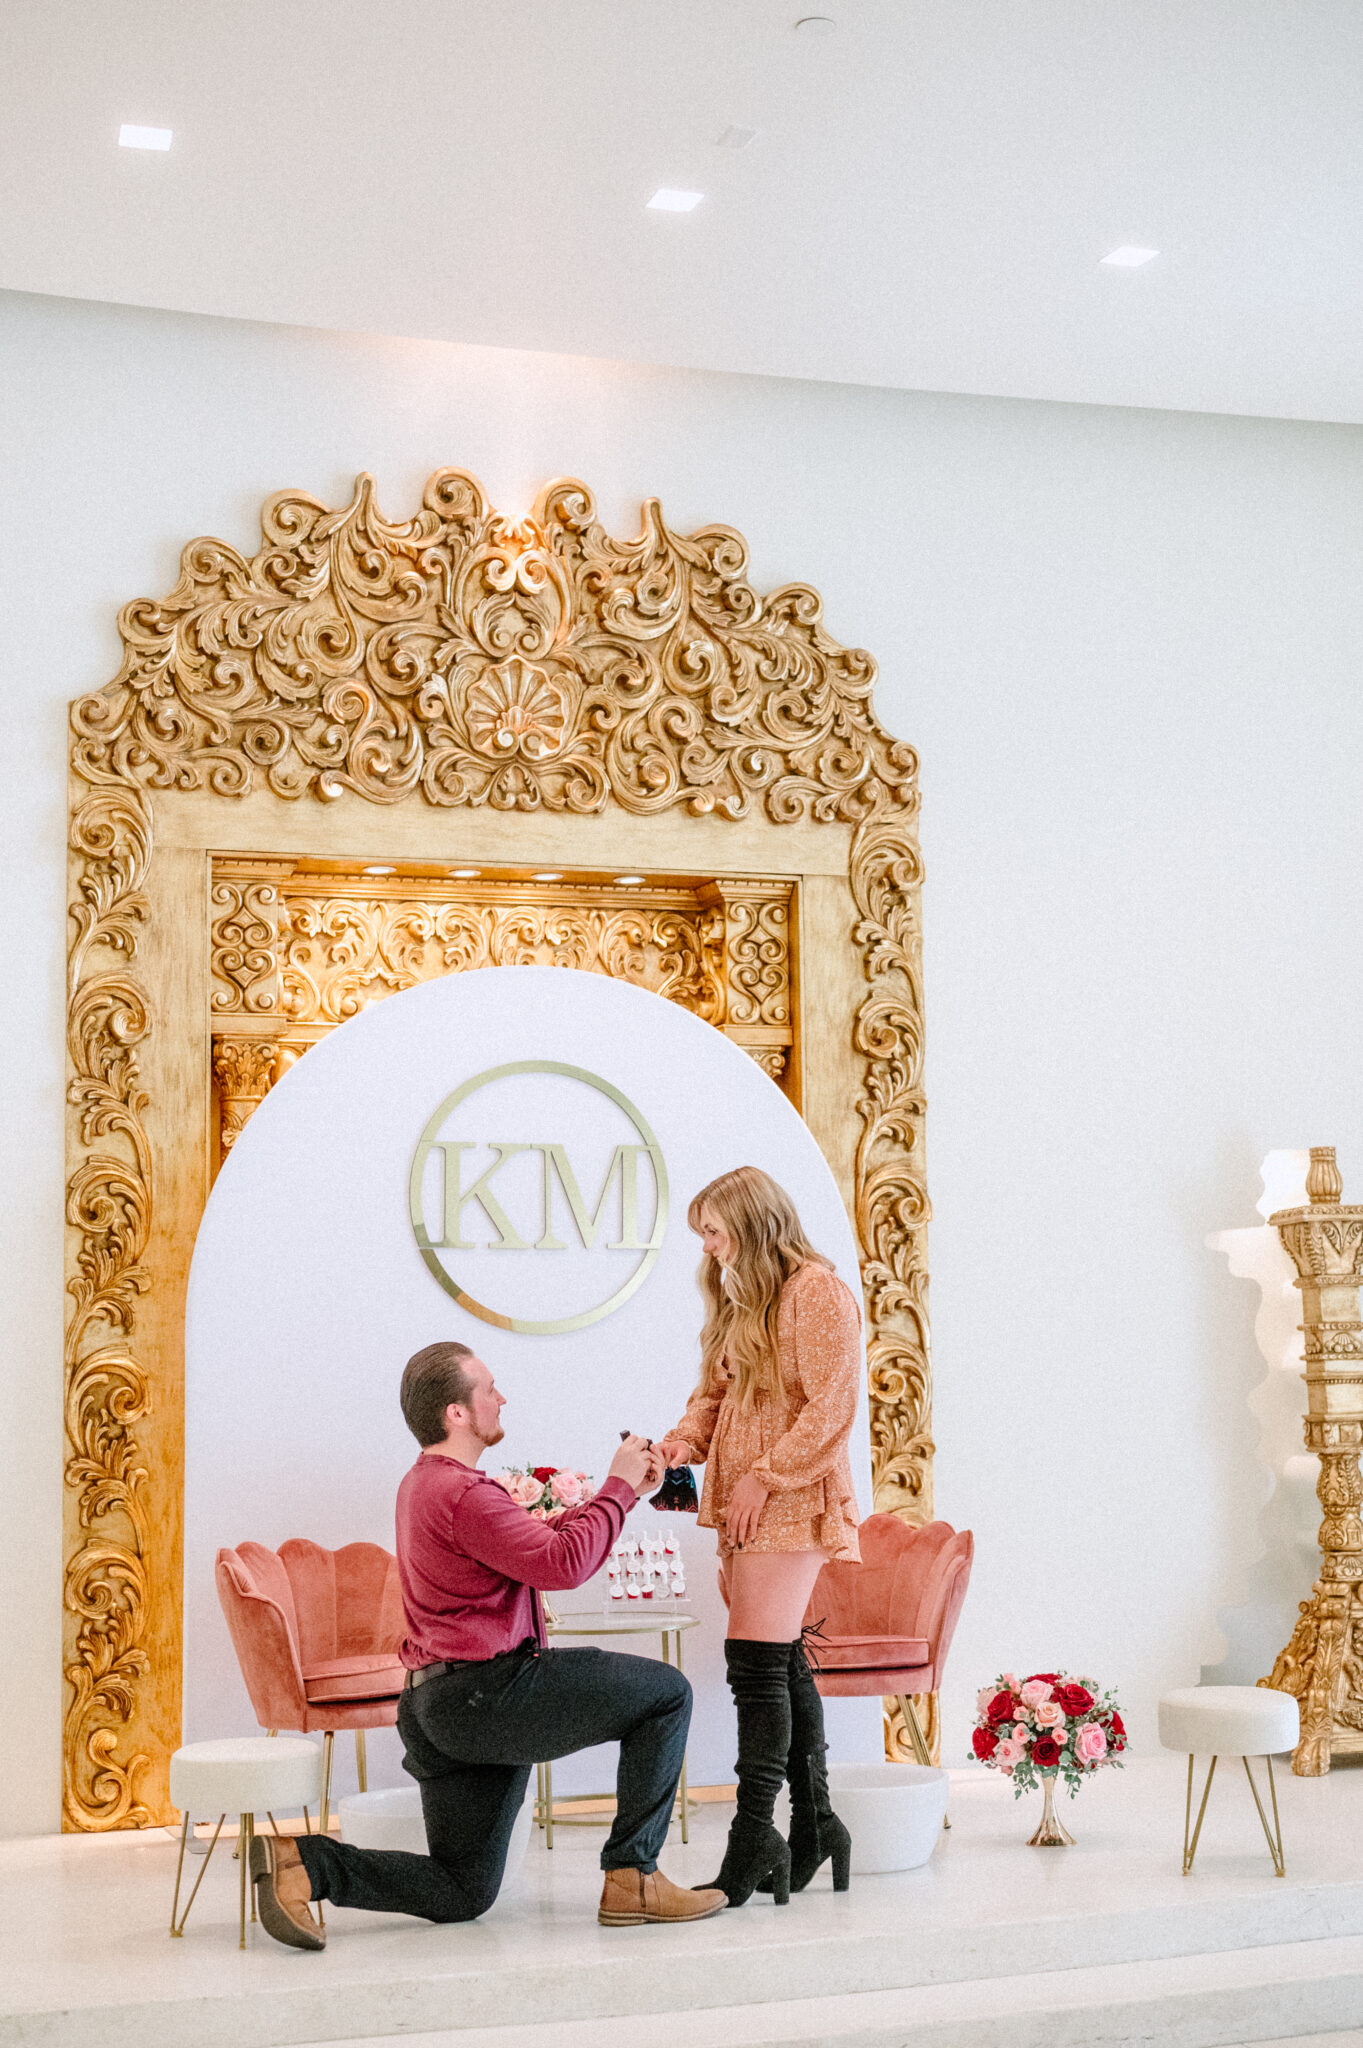 Man Proposing in front of backdrop